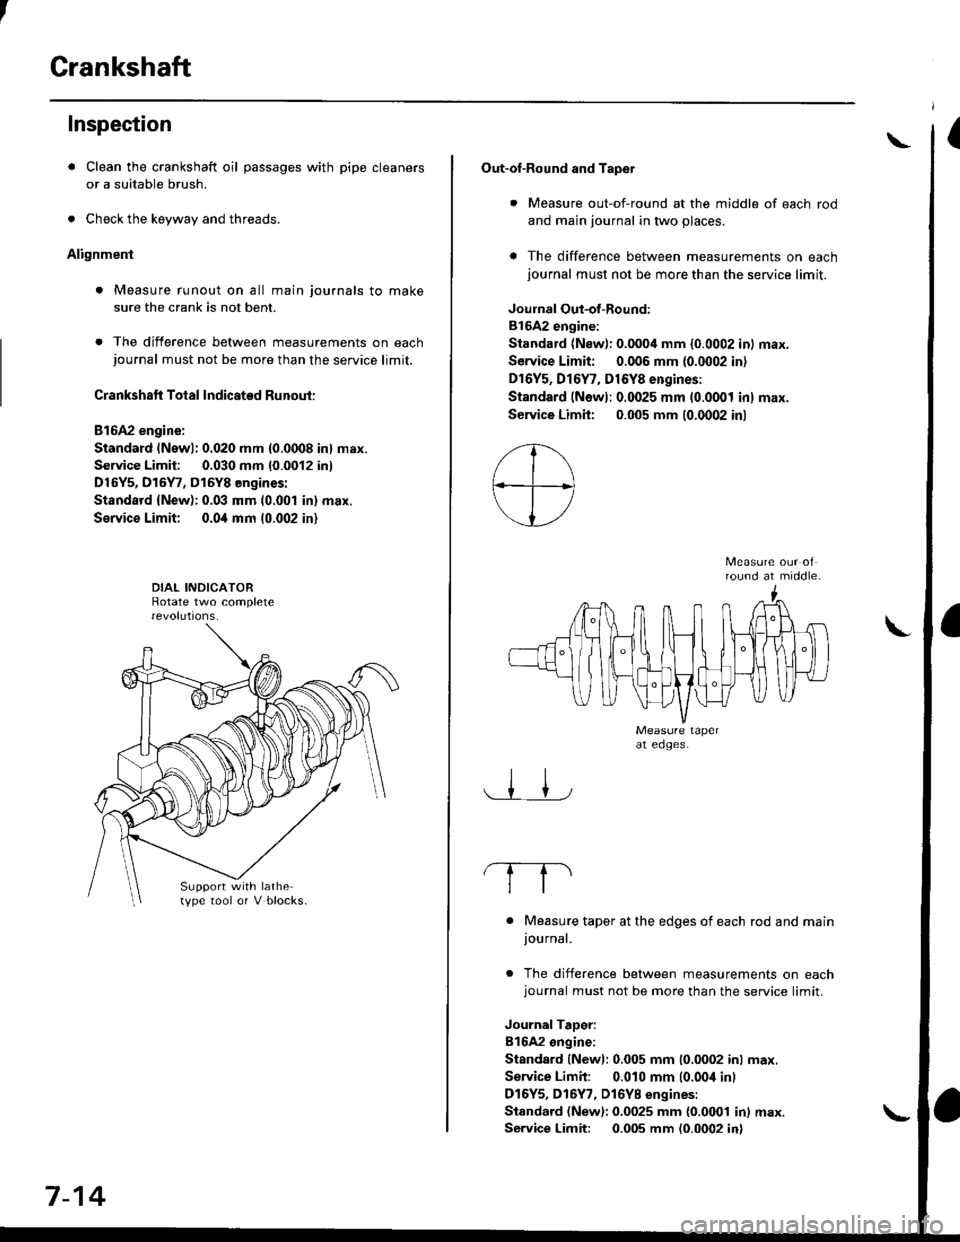 HONDA CIVIC 2000 6.G Repair Manual Crankshaft
Inspection
. Clean the crankshaft oil passages with pipe cleaners
or a suitable brush.
. Check the keyway and threads.
Alignment
. Measure runout on all main journals to make
sure the crank